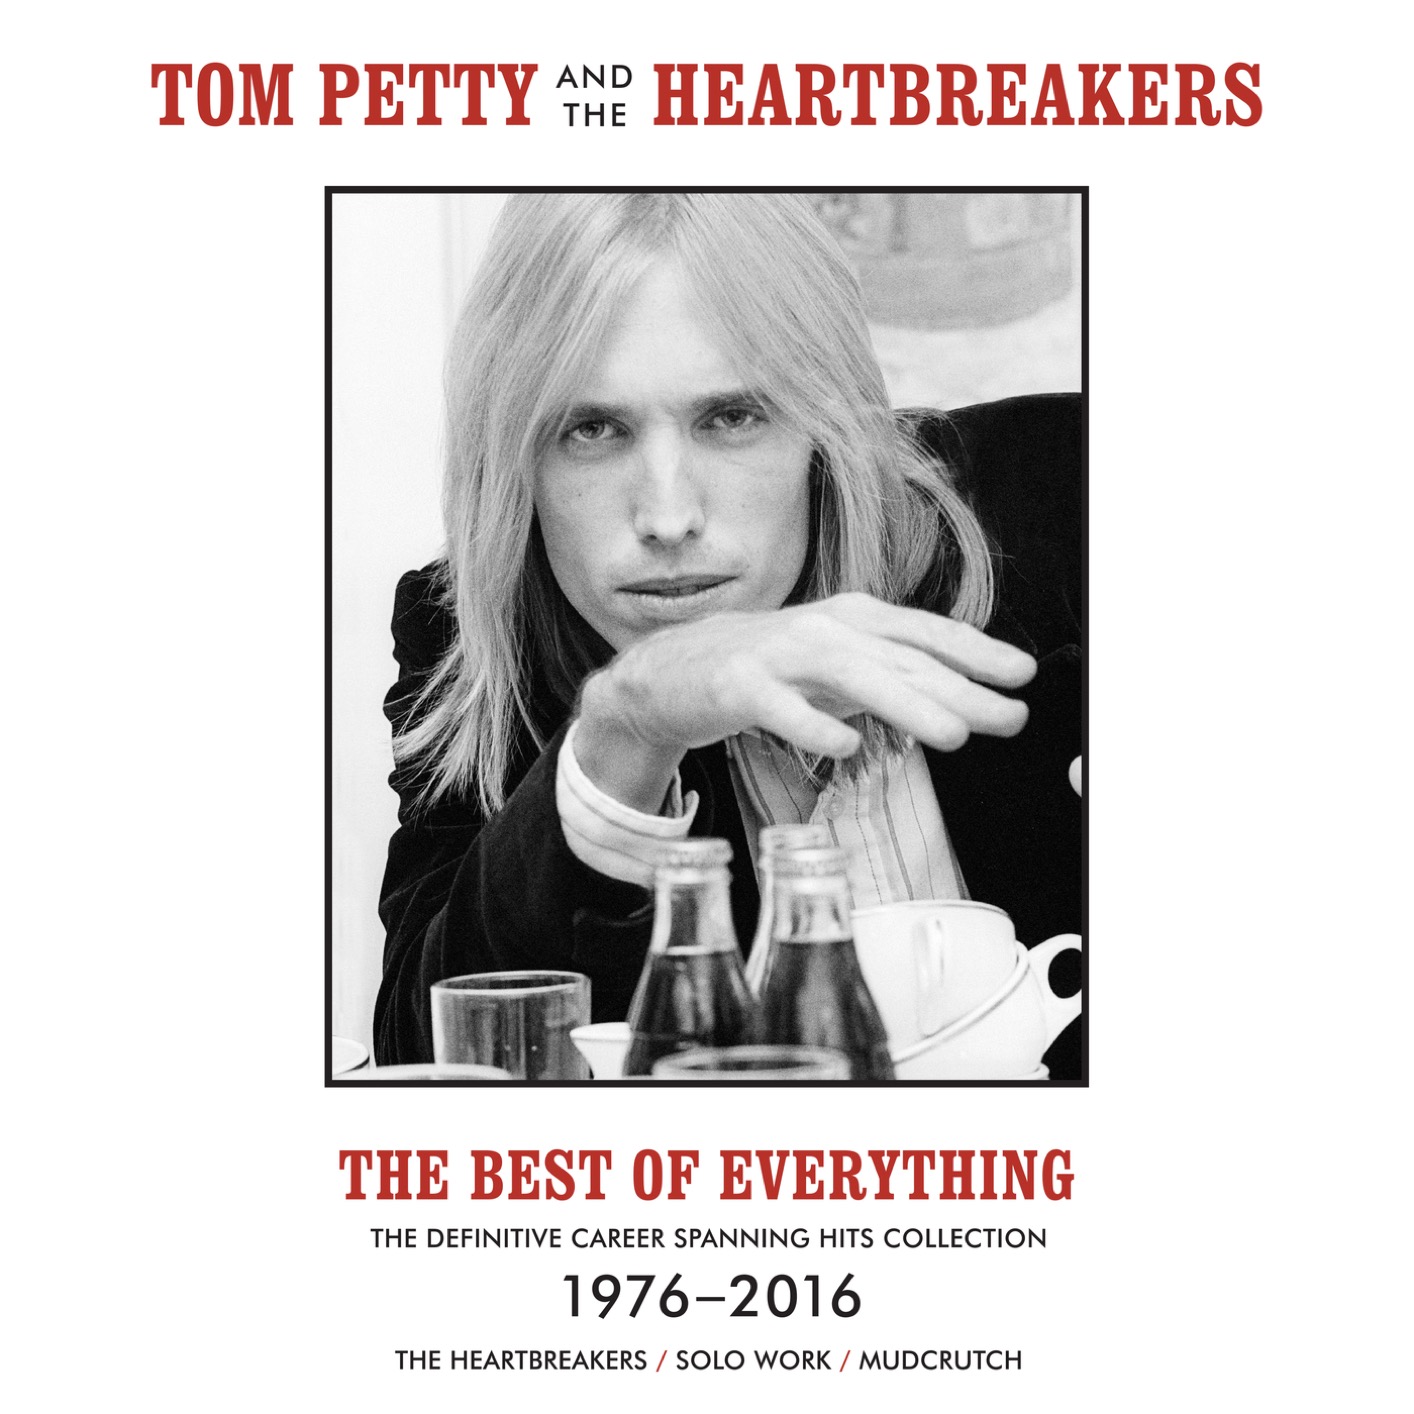 Tom Petty – The Best Of Everything – The Definitive Career Spanning Hits Collection 1976-2016 (2019) [FLAC 24bit/96kHz]